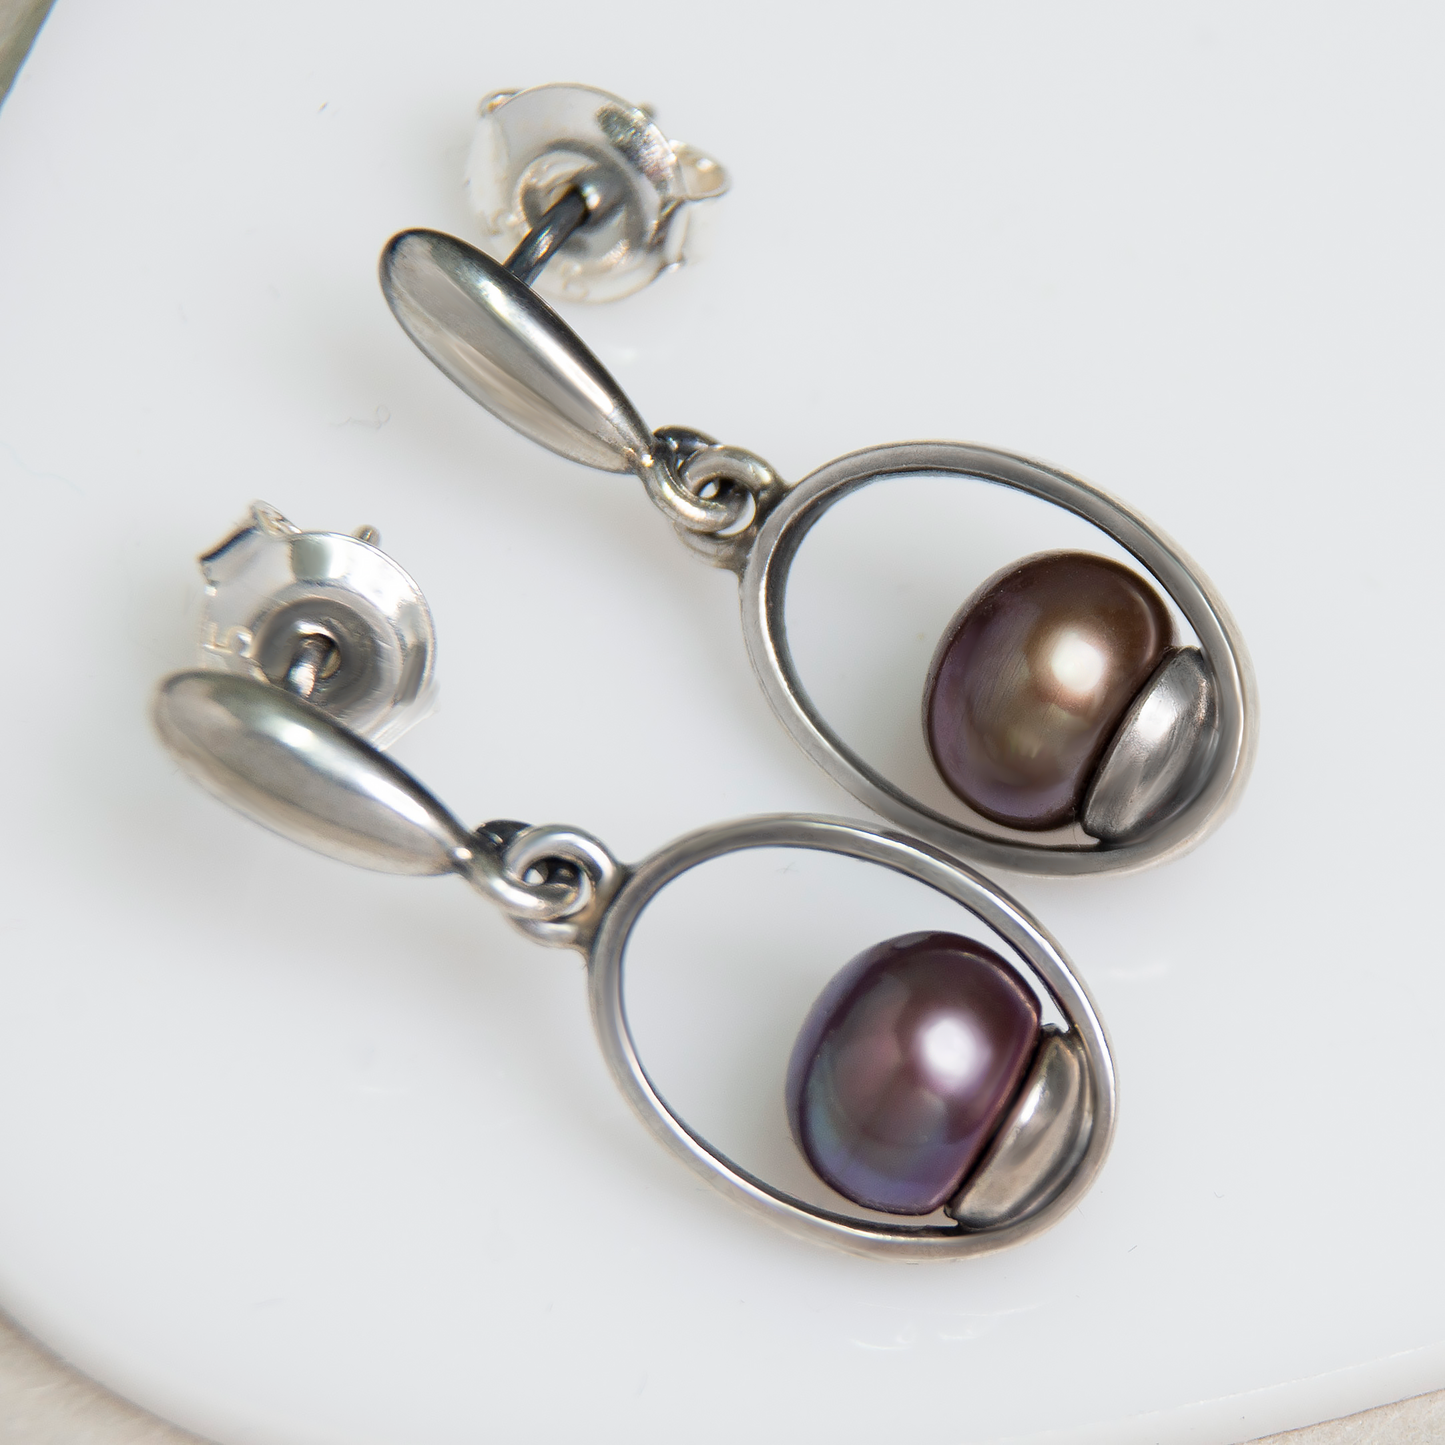 Minimalistic  Dangle Oval Frame Earrings With Peacock Pearls